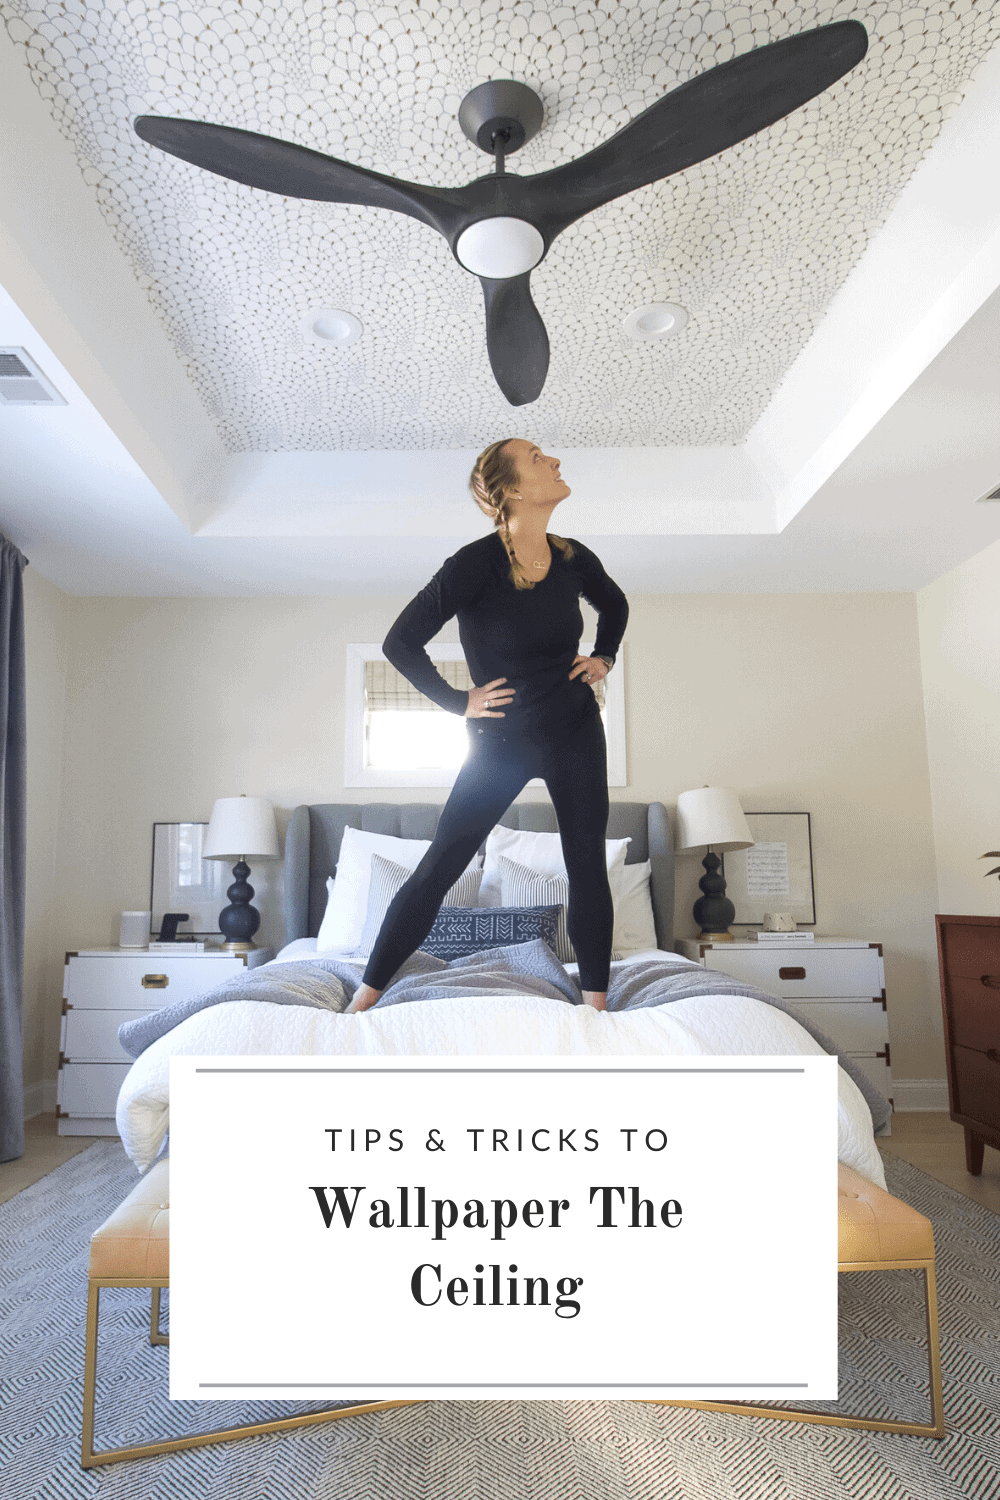 Tips and tricks to wallpaper the ceiling